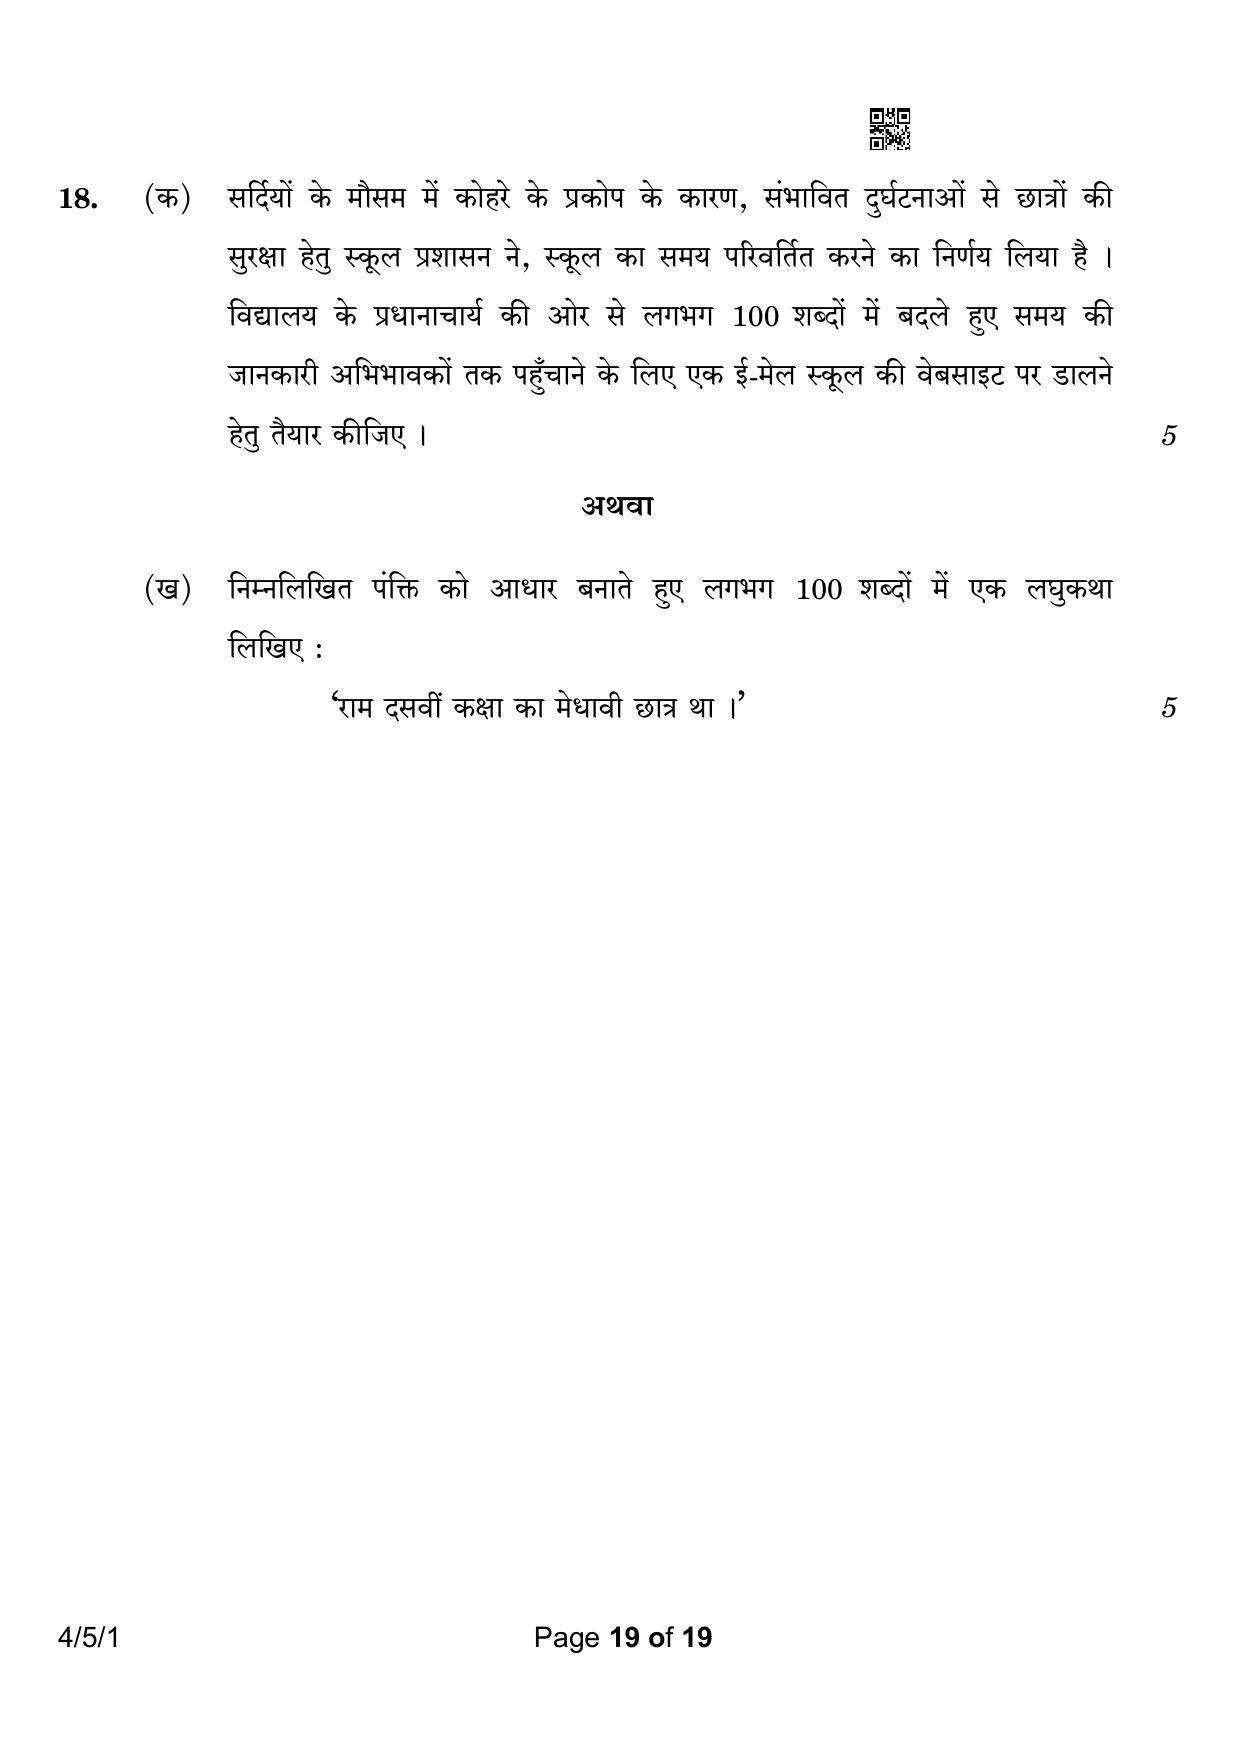 CBSE Class 10 4-5-1 Hindi B 2023 Question Paper - Page 19